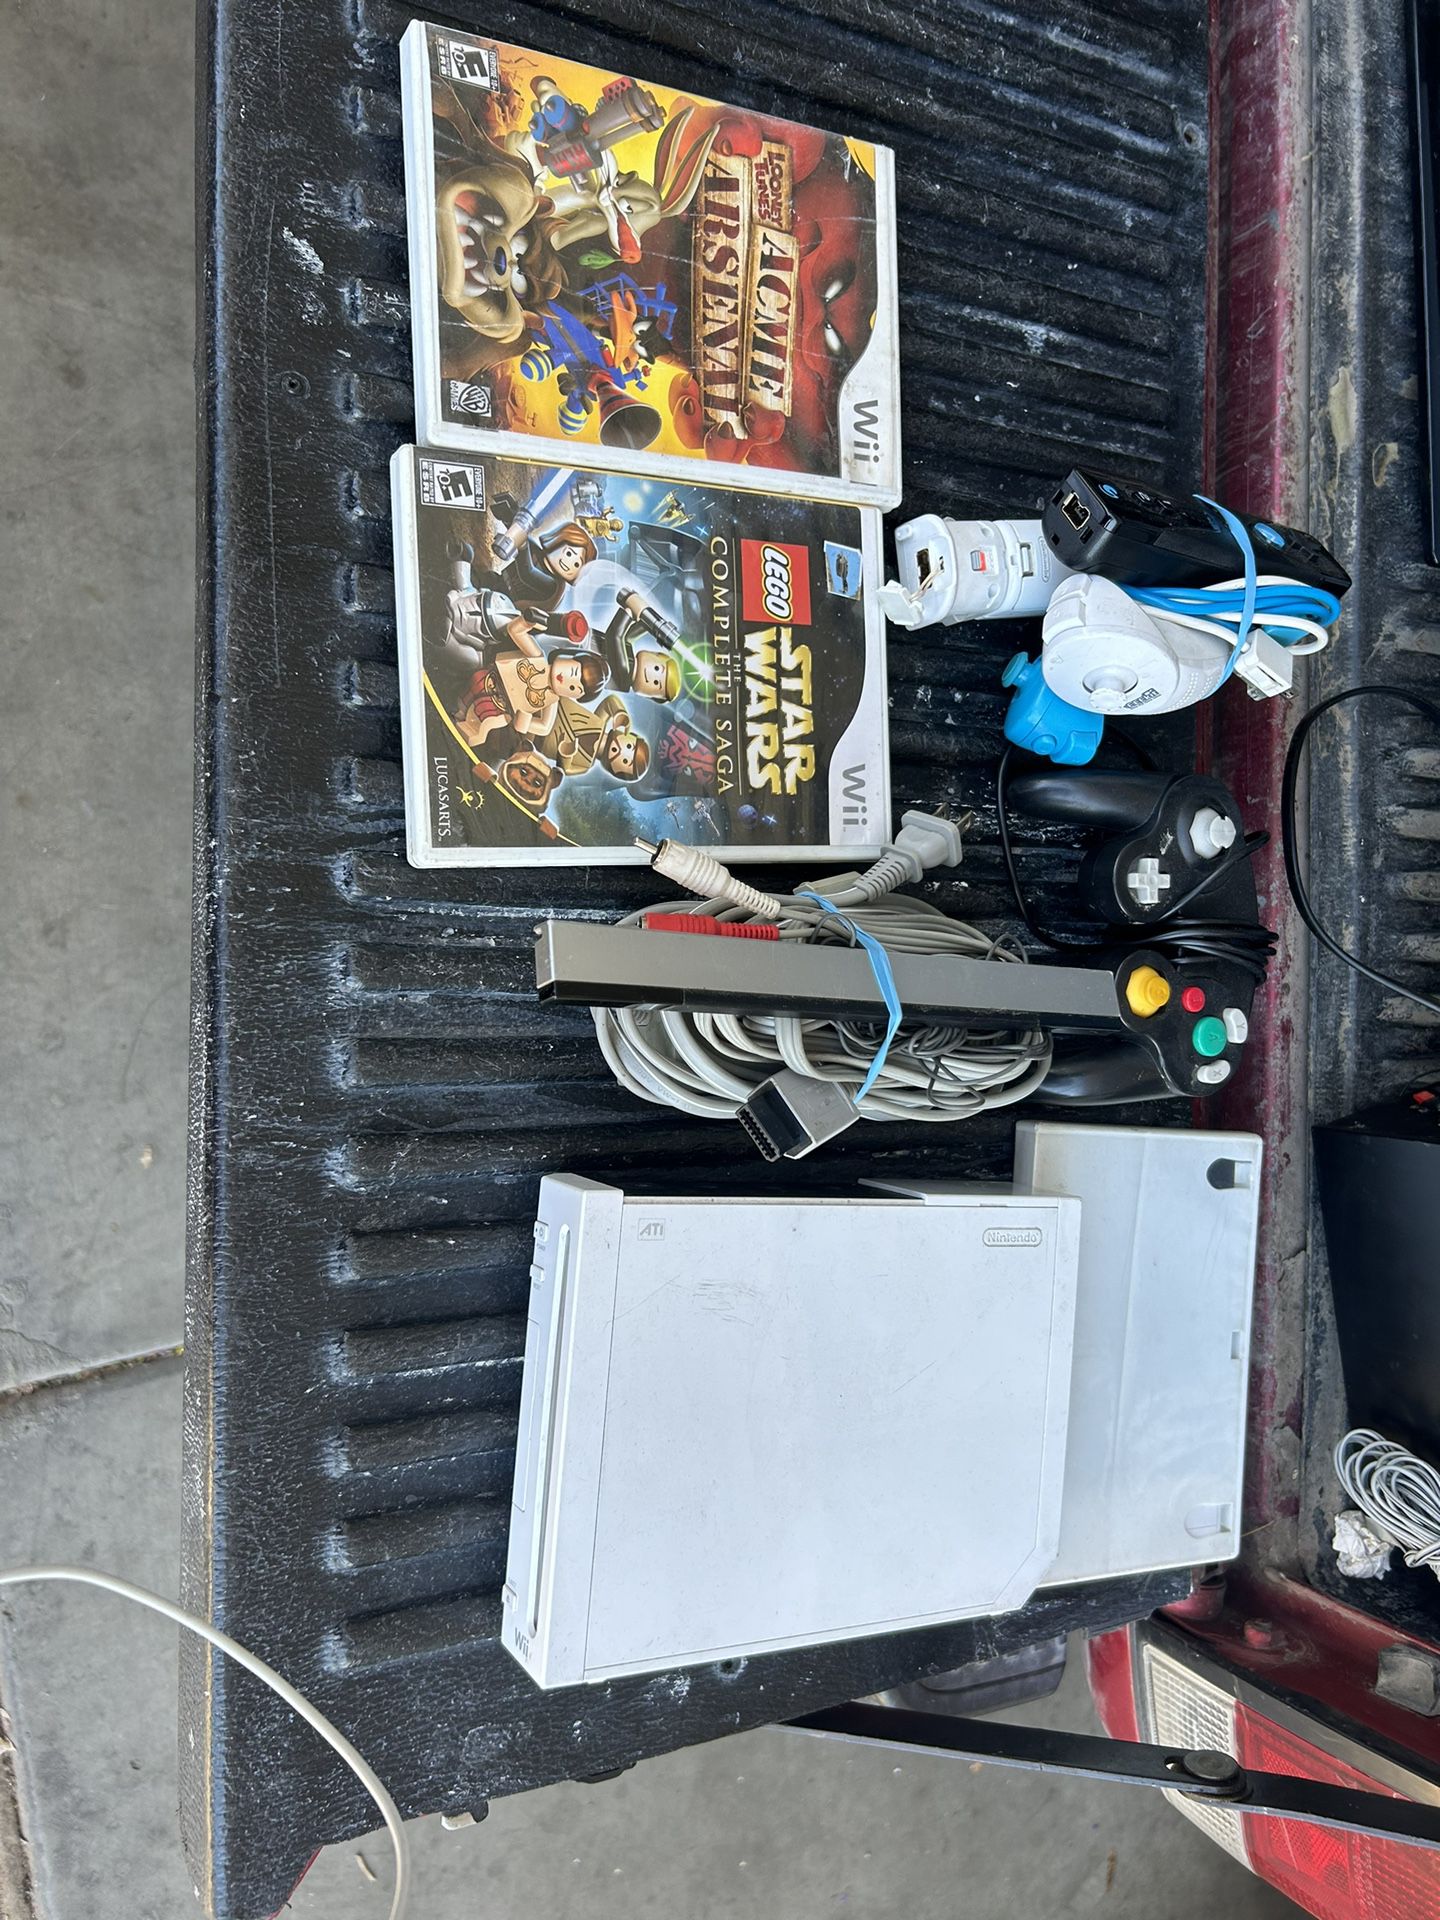 Nintendo Wii And Tv For $90